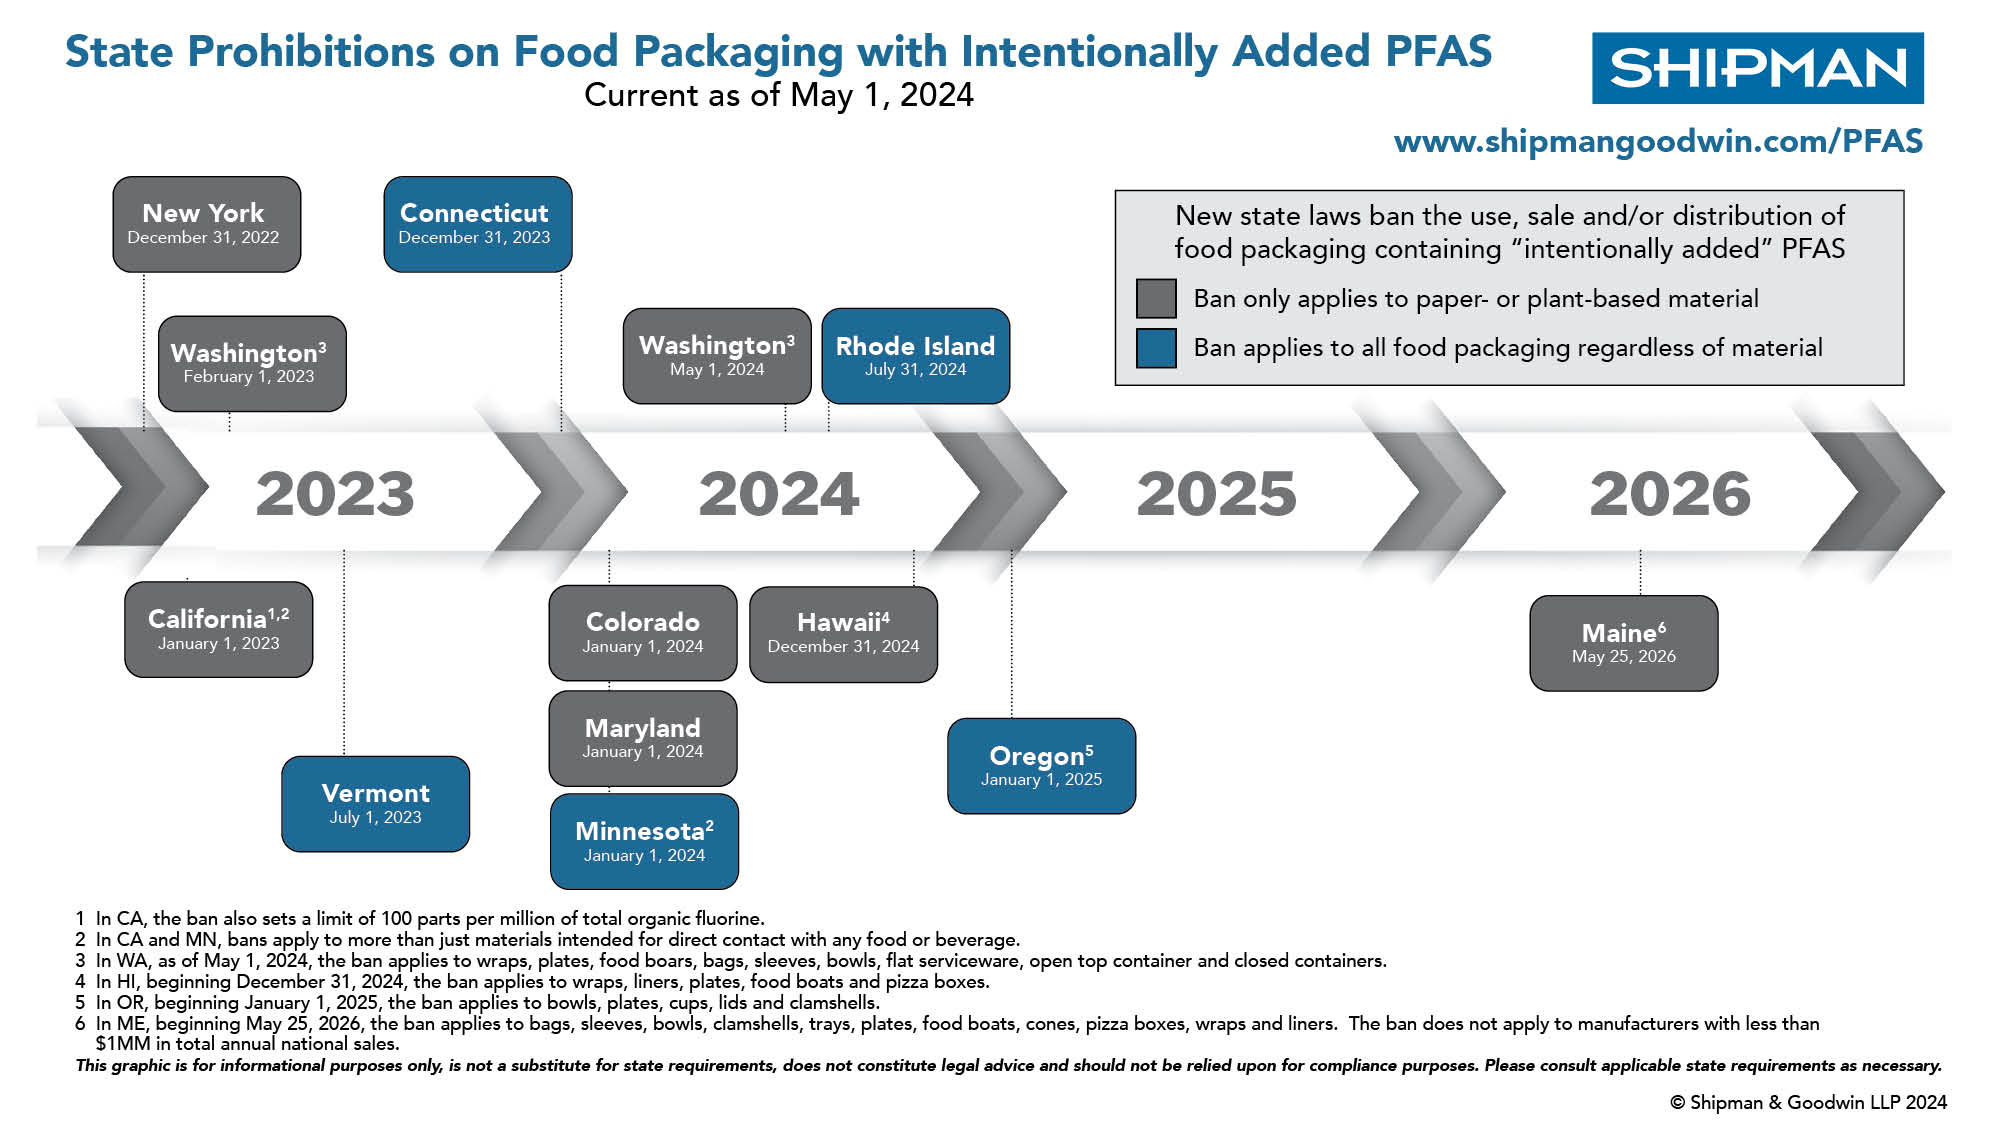 Timeline graphic showing upcoming state prohibitions on PFAS in food packaging